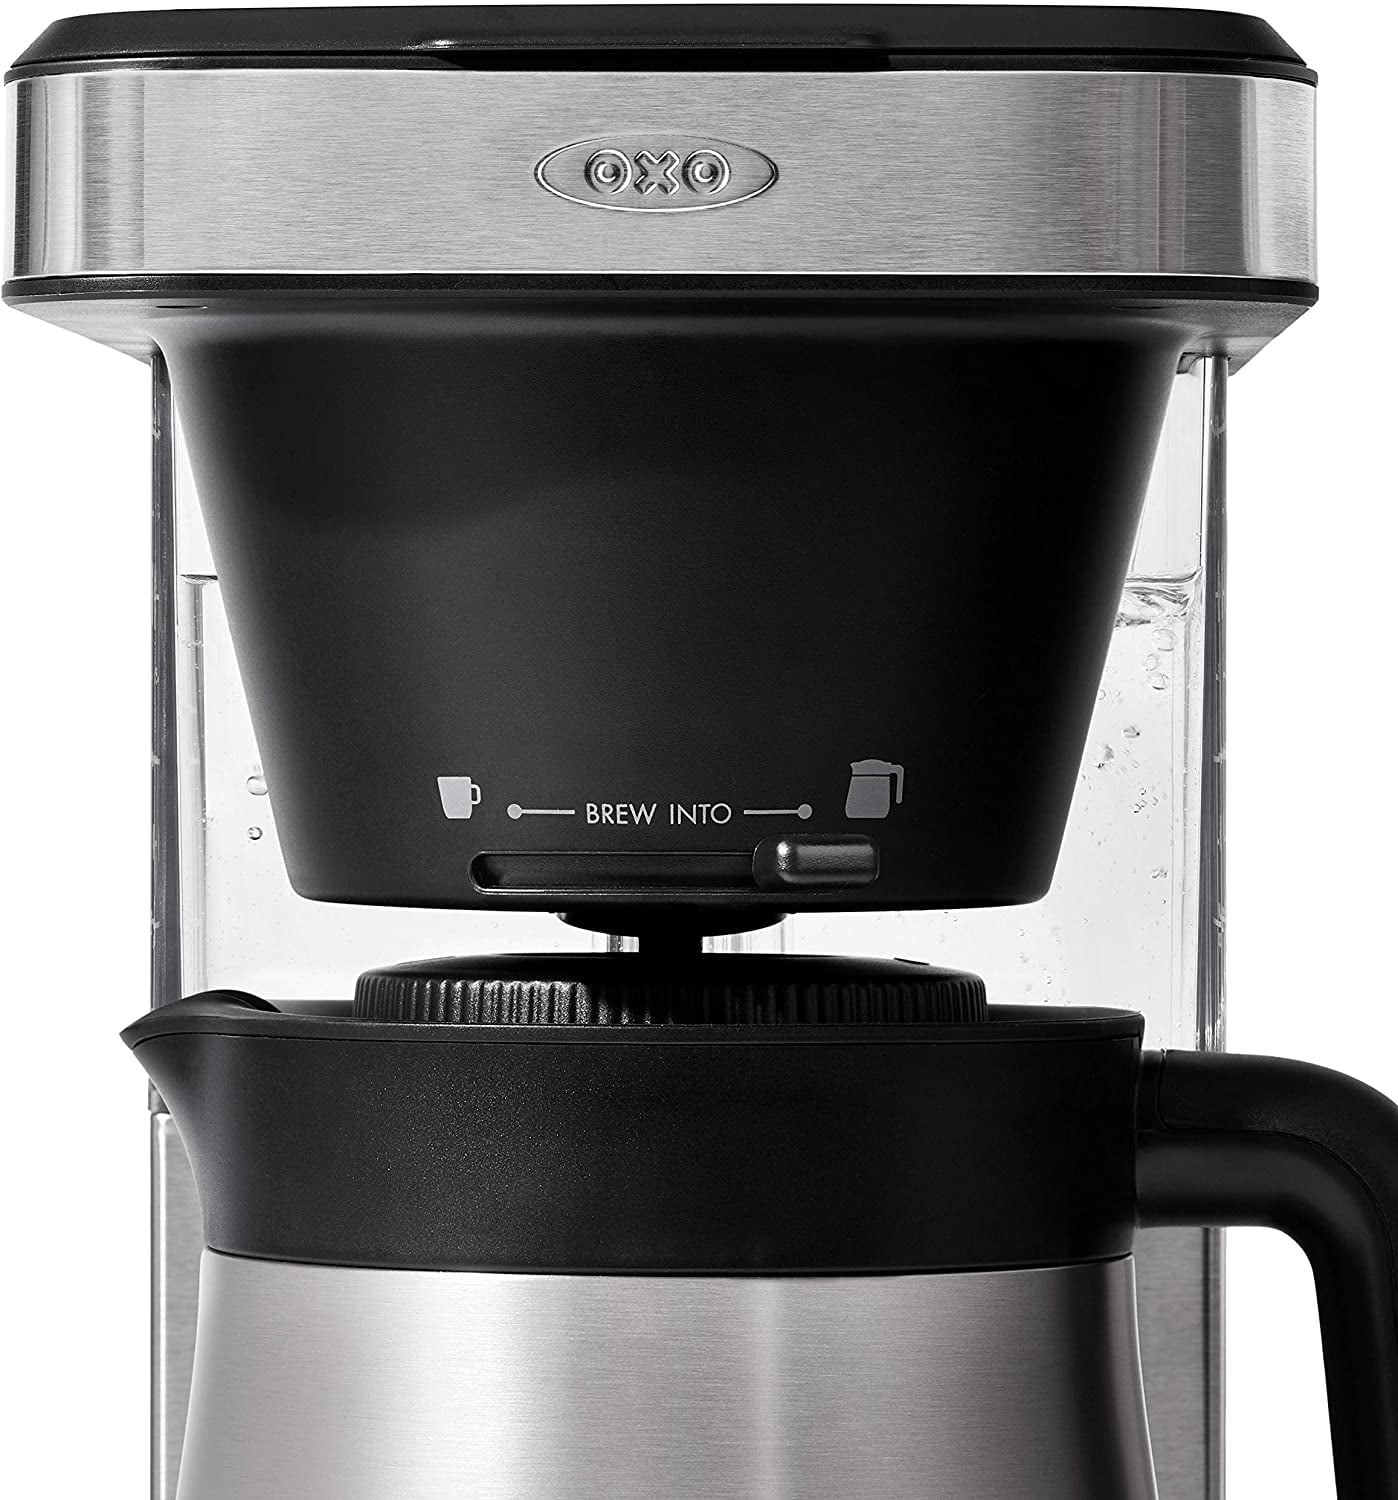 Brewing with the OXO 8-Cup Coffee Maker » Hangry Woman®